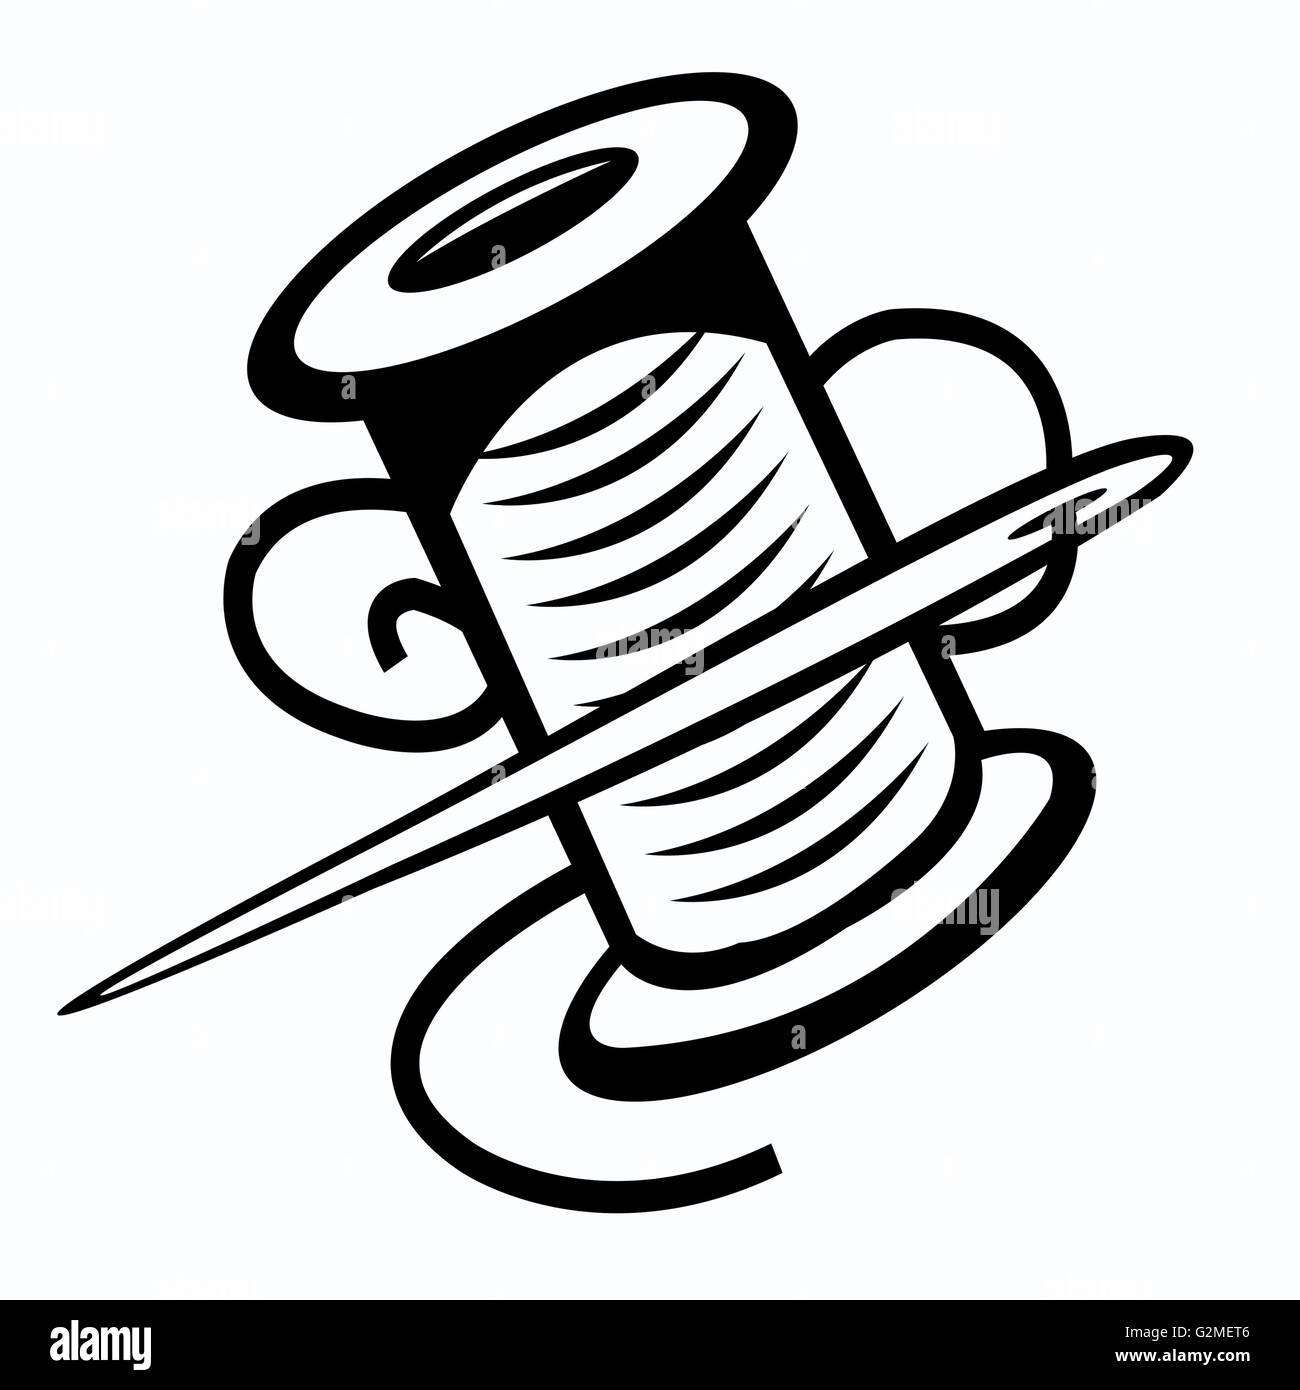 Needle thread illustration Cut Out Stock Images & Pictures - Alamy